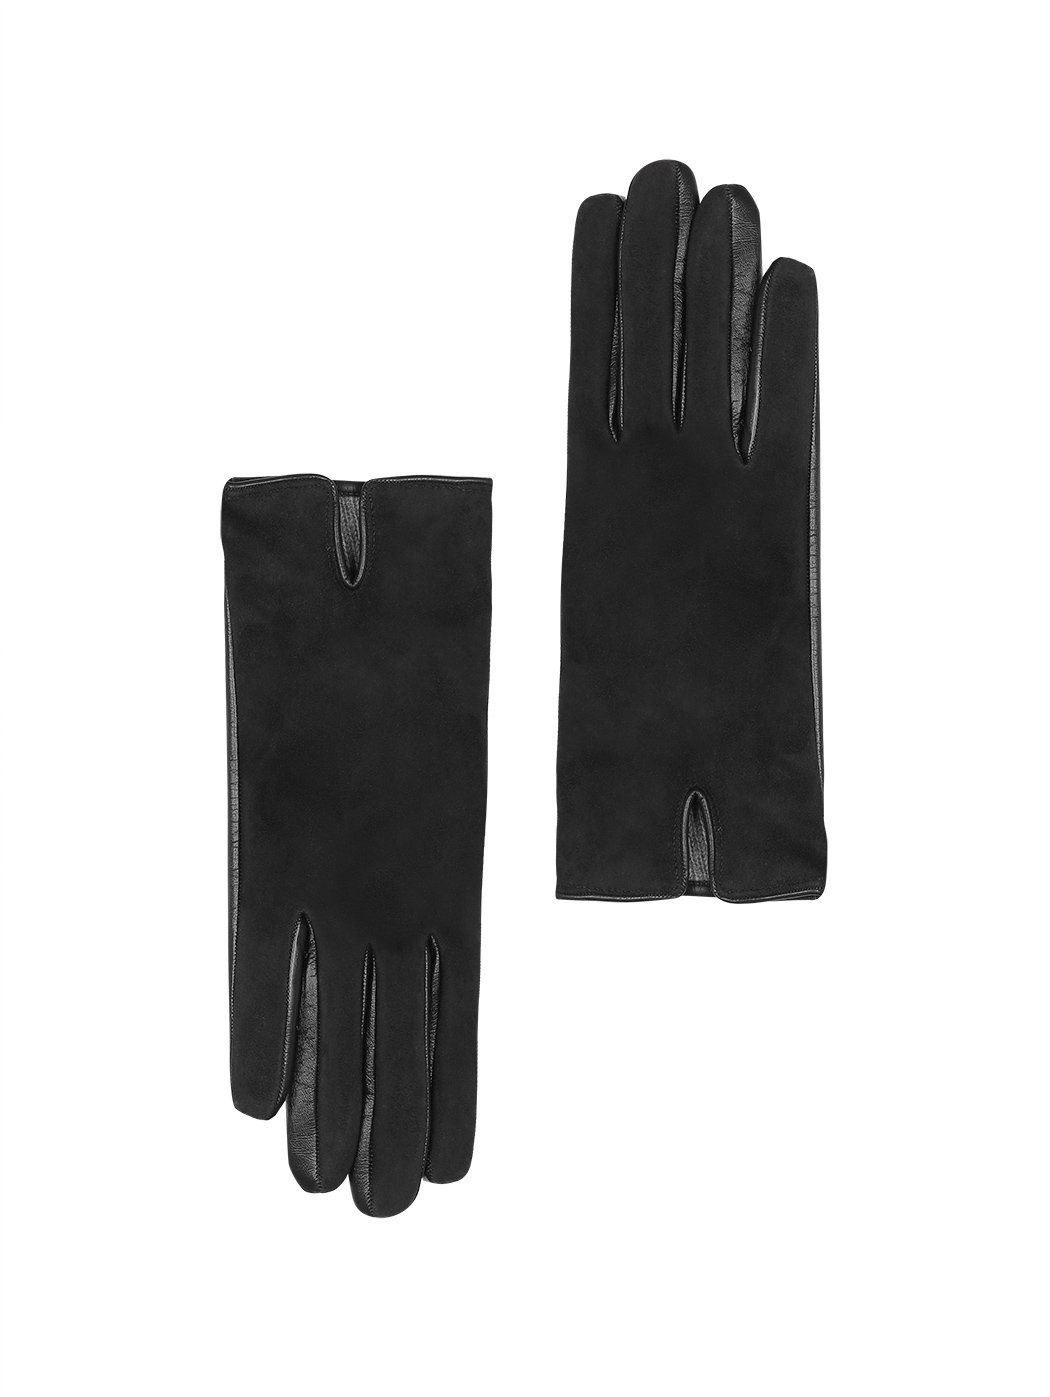 Women's Touchscreen Gloves in Leather Black